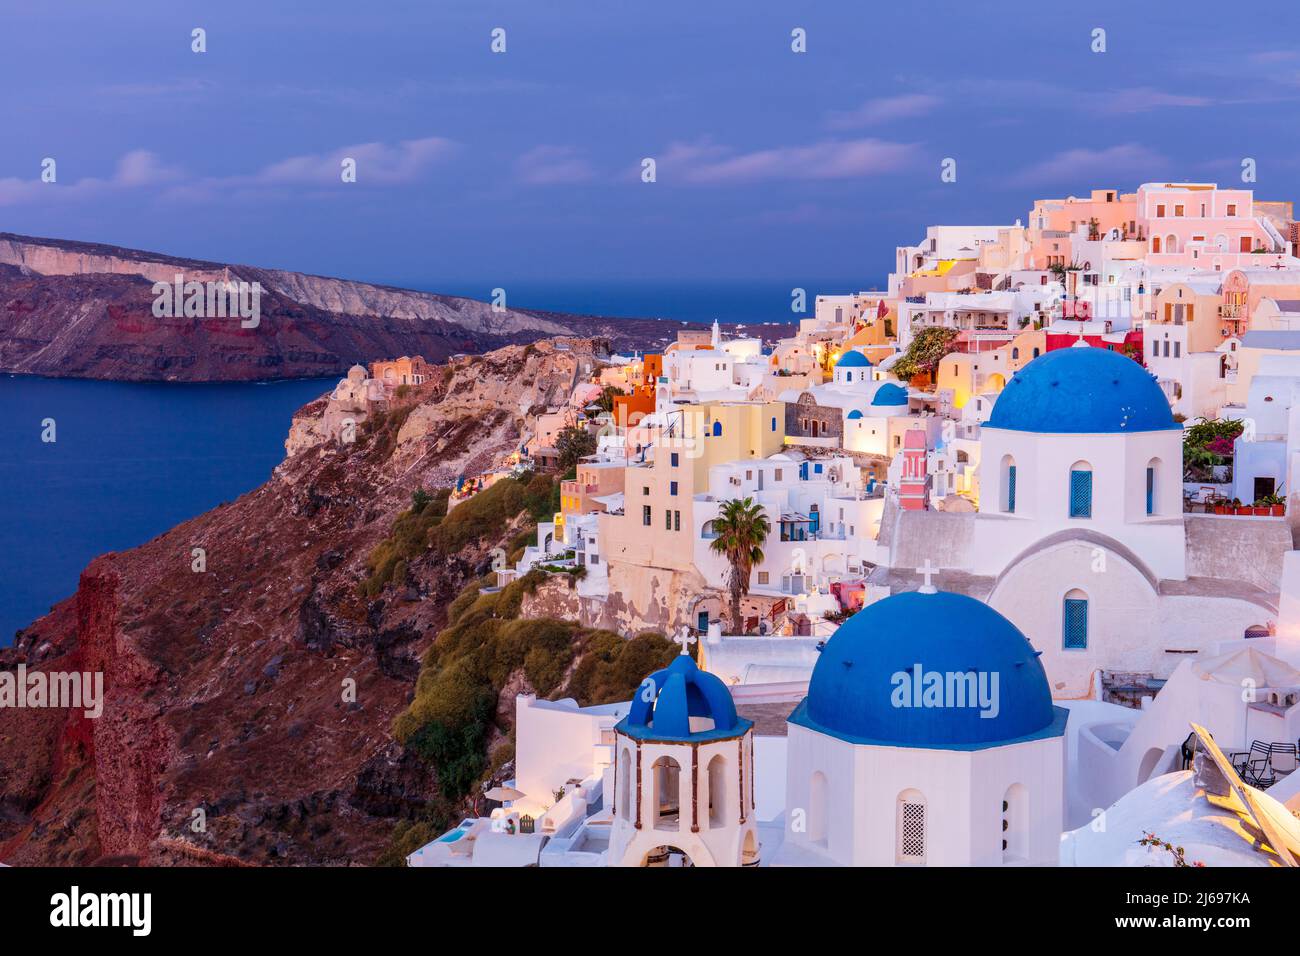 Blue domed white church and colourful buildings at sunrise, Oia, Santorini, Cyclades, Greek Islands, Greece, Europe Stock Photo